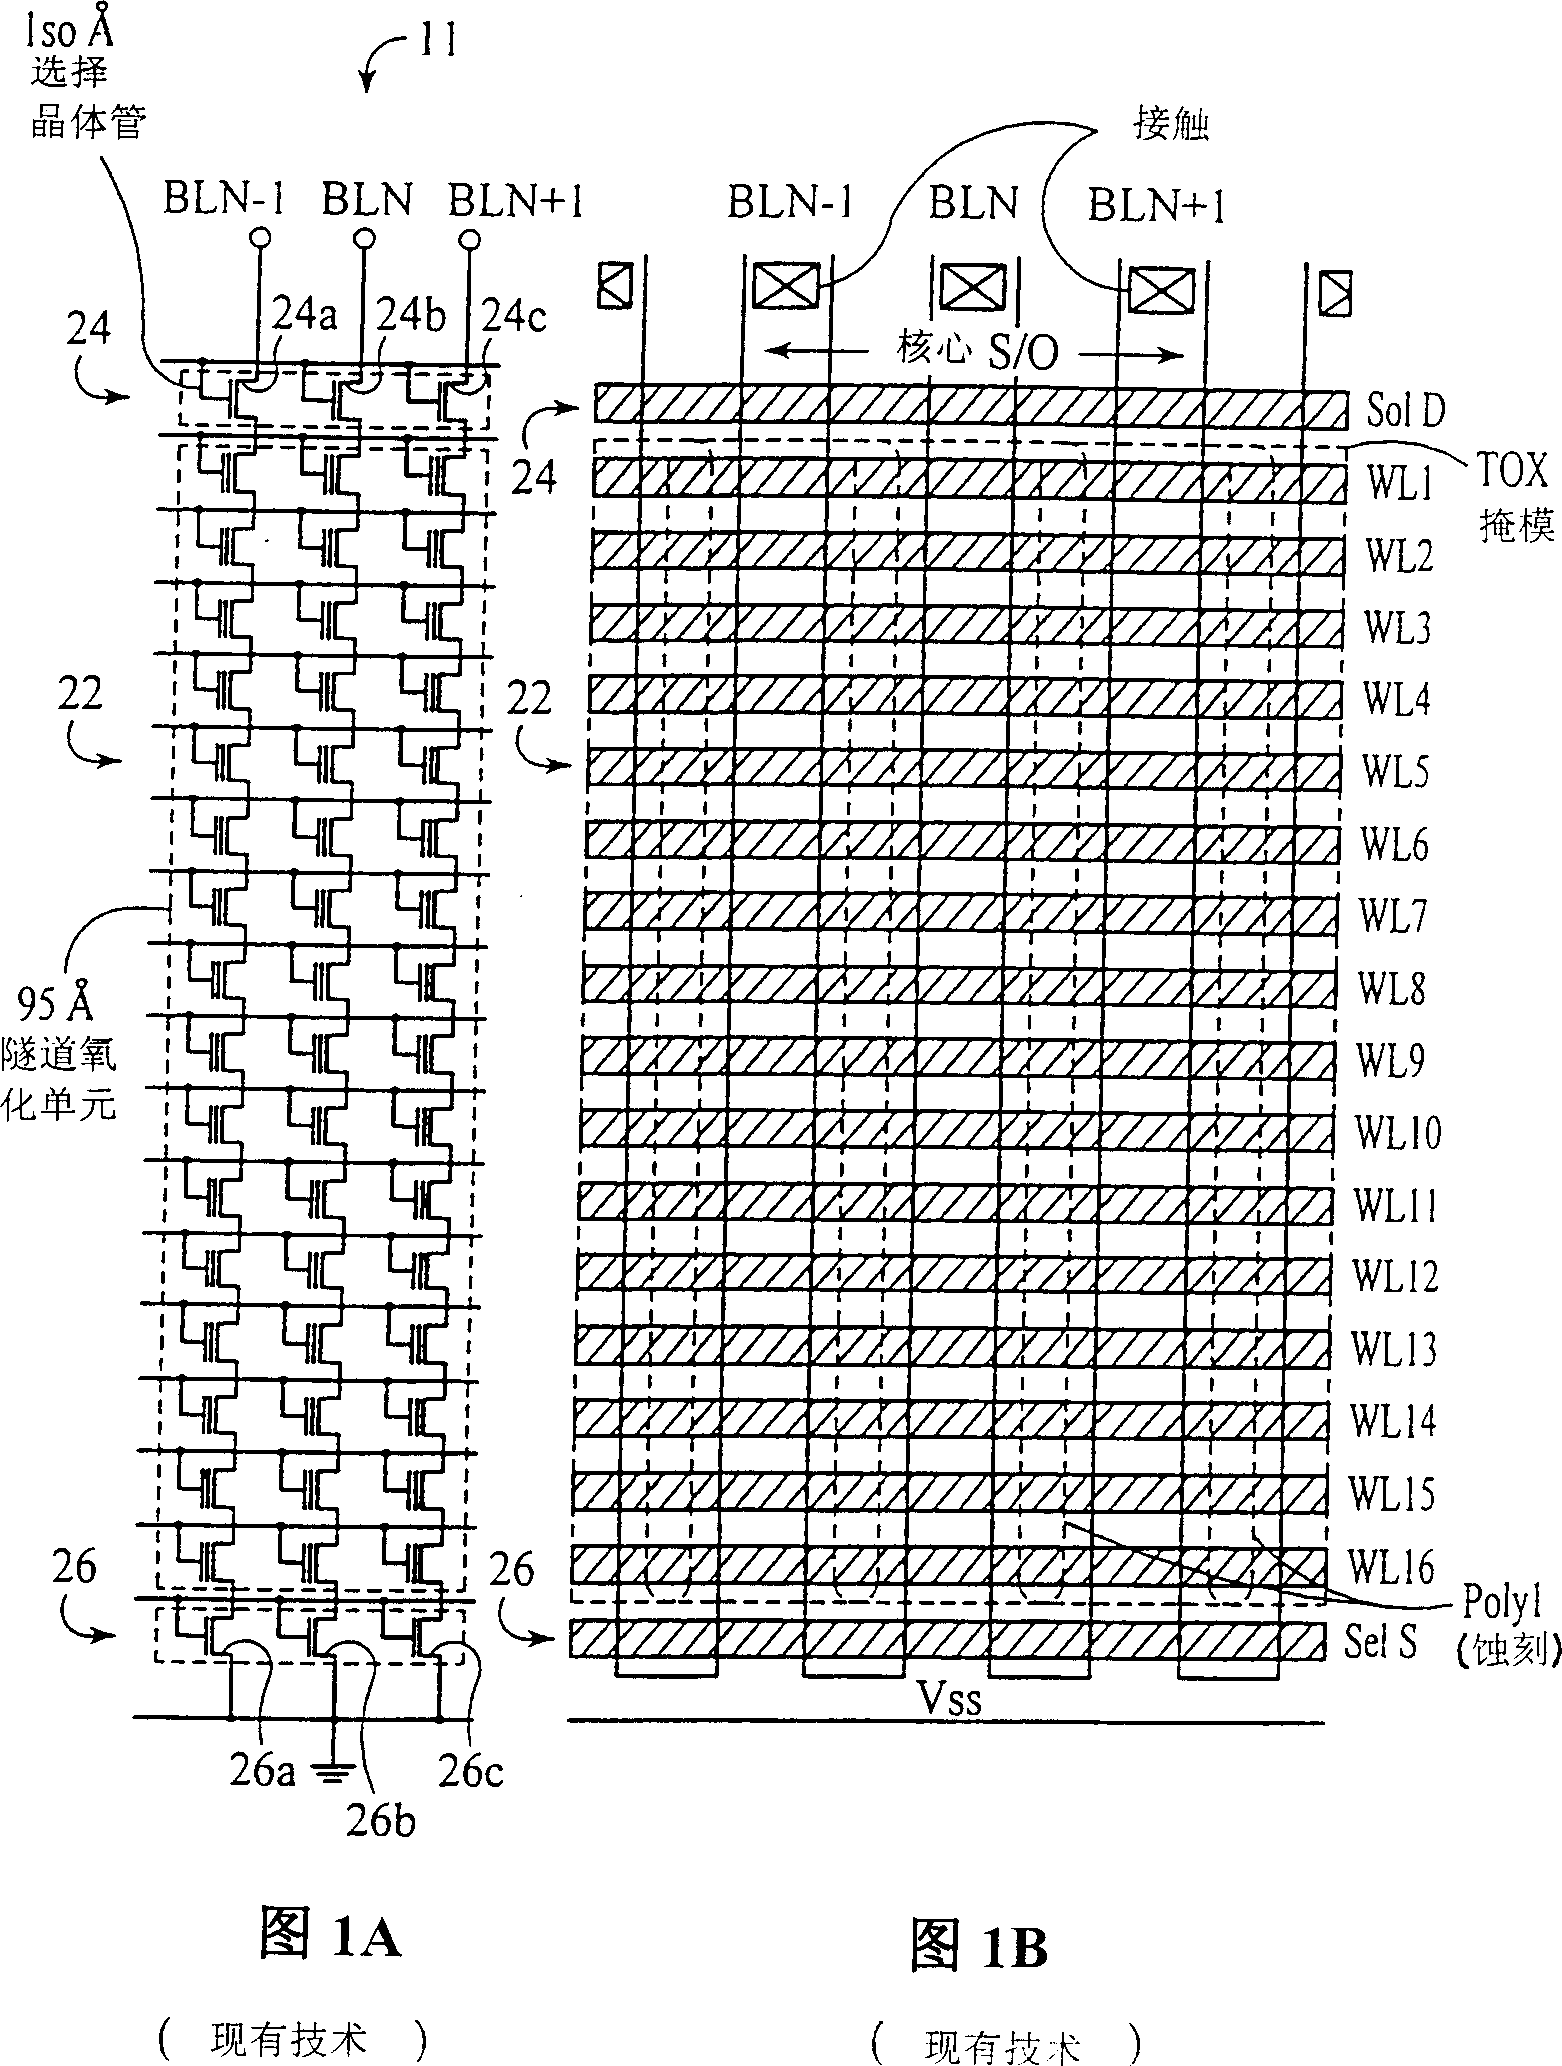 Method for providing dopant level for polysilicon for flash memory devices